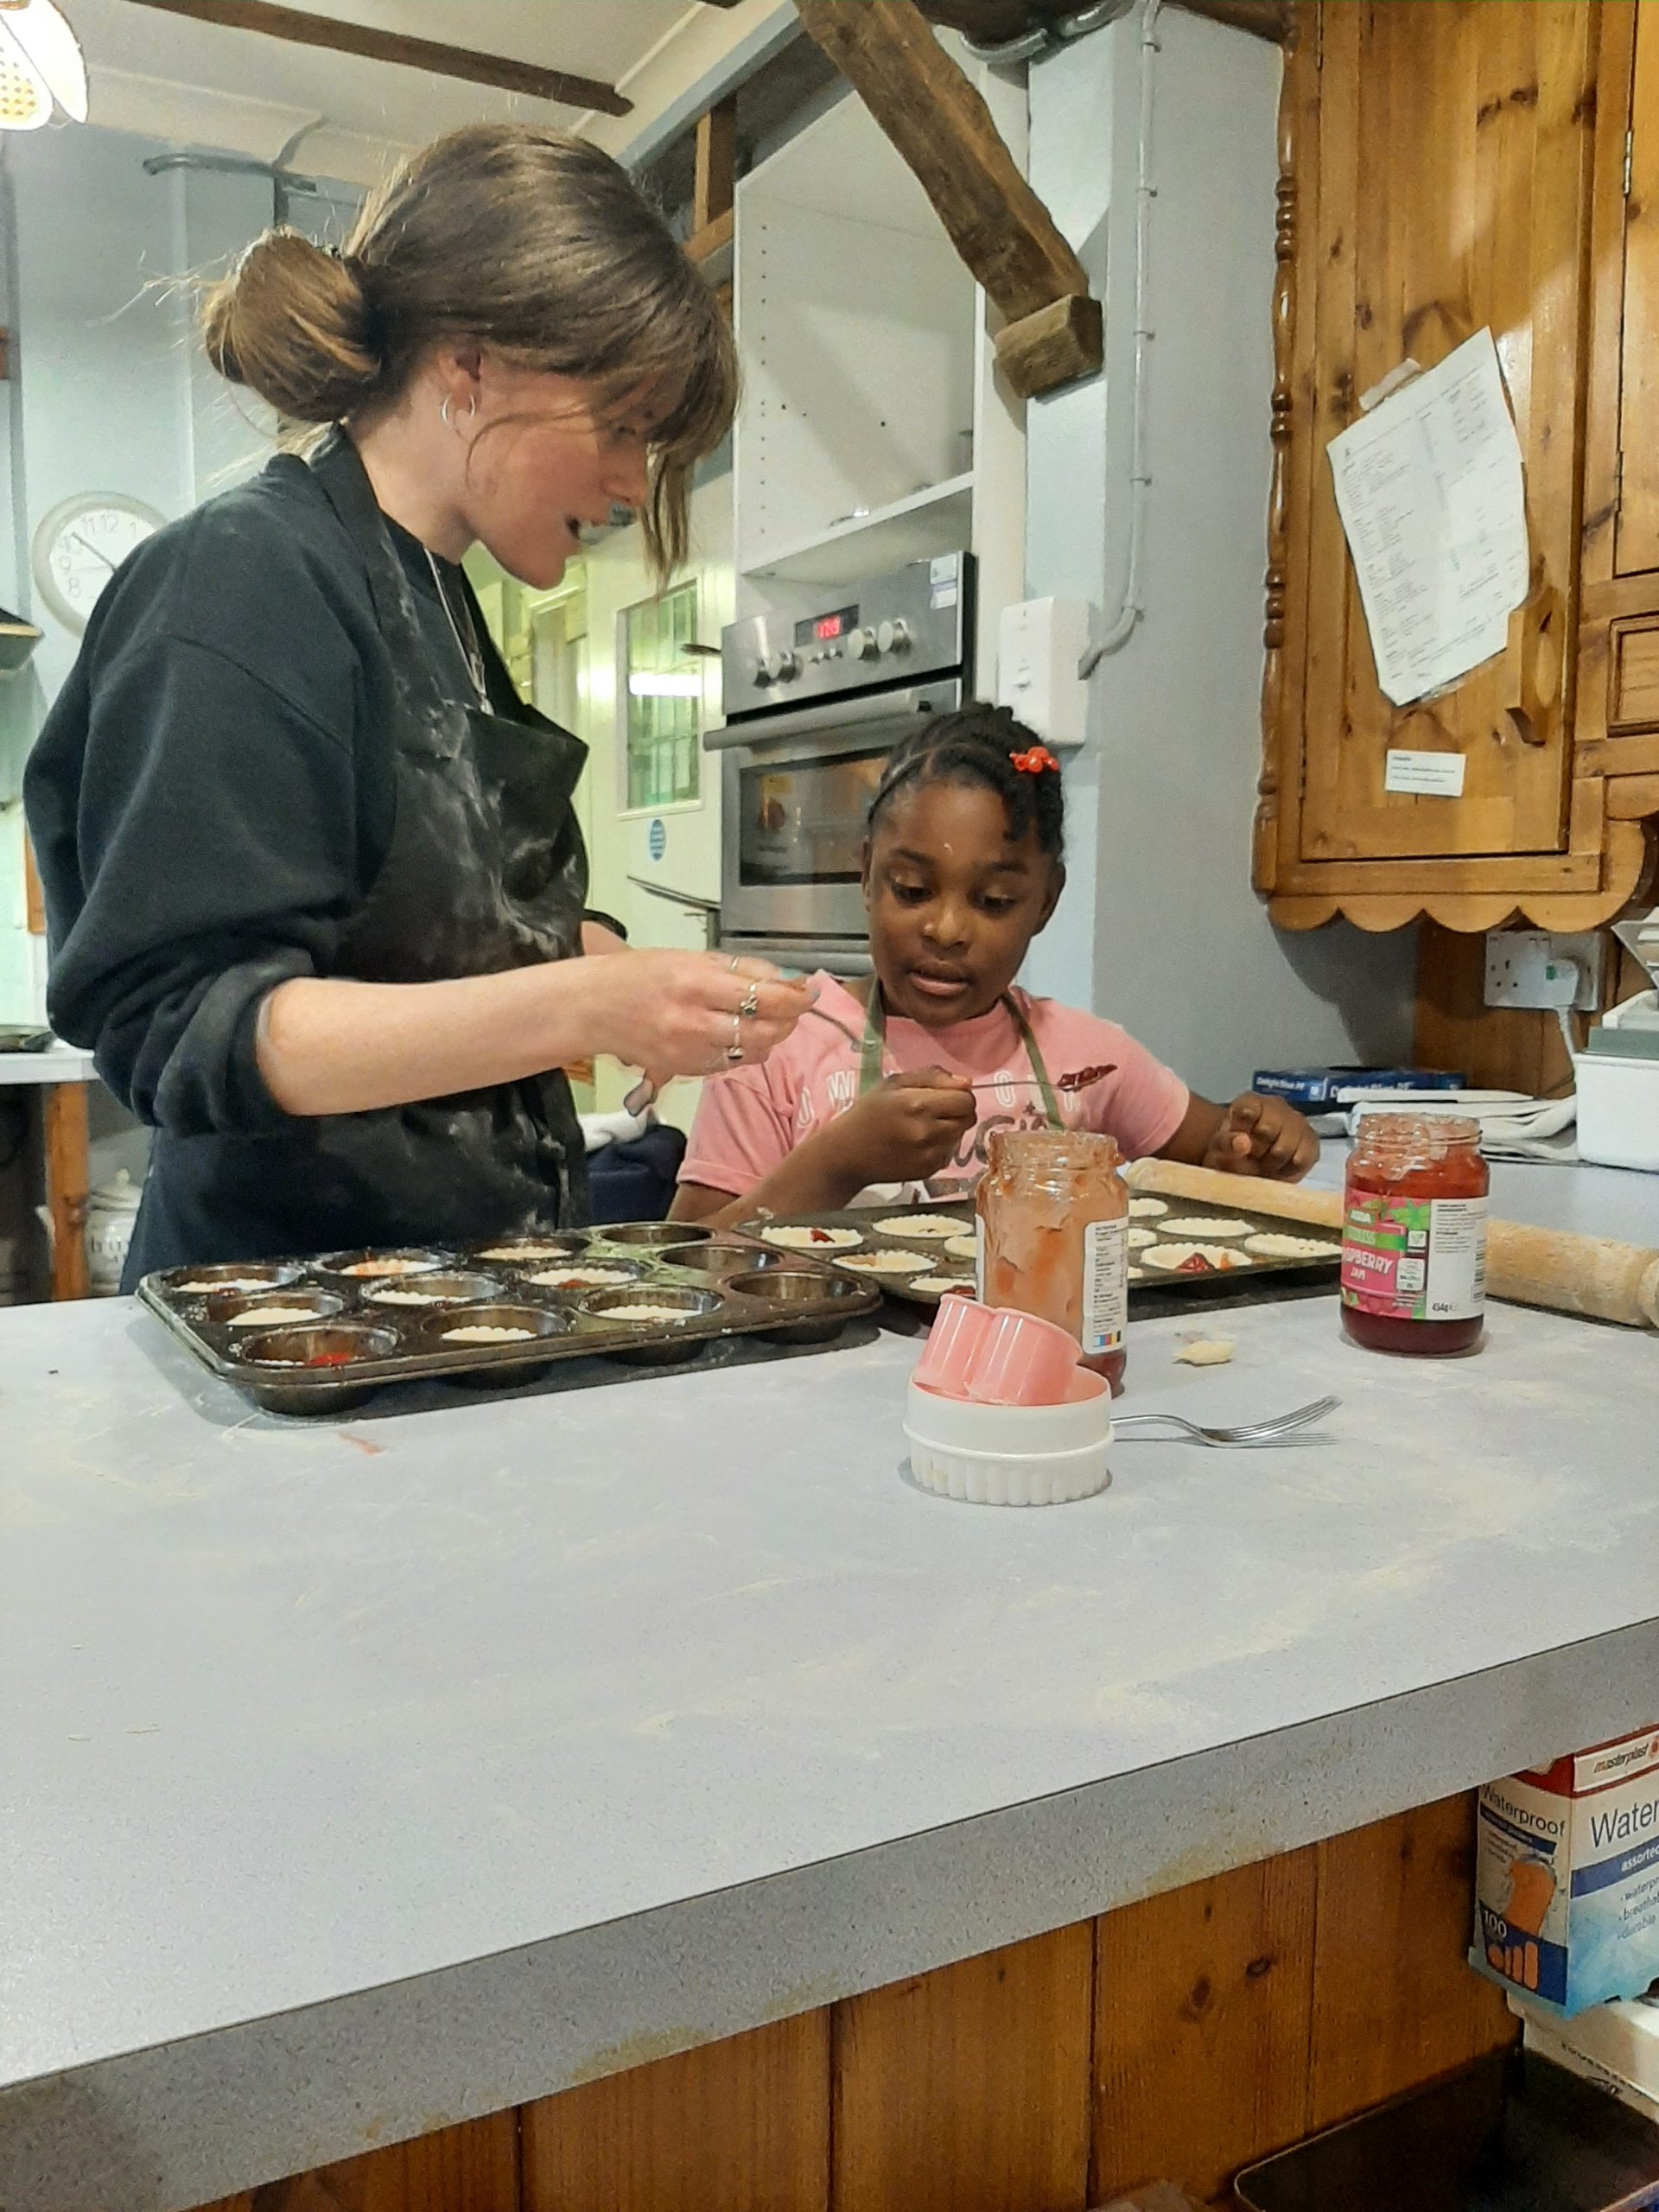 A young Rookwood boarding school student makes cakes in the kitchen with the boarding school staff.